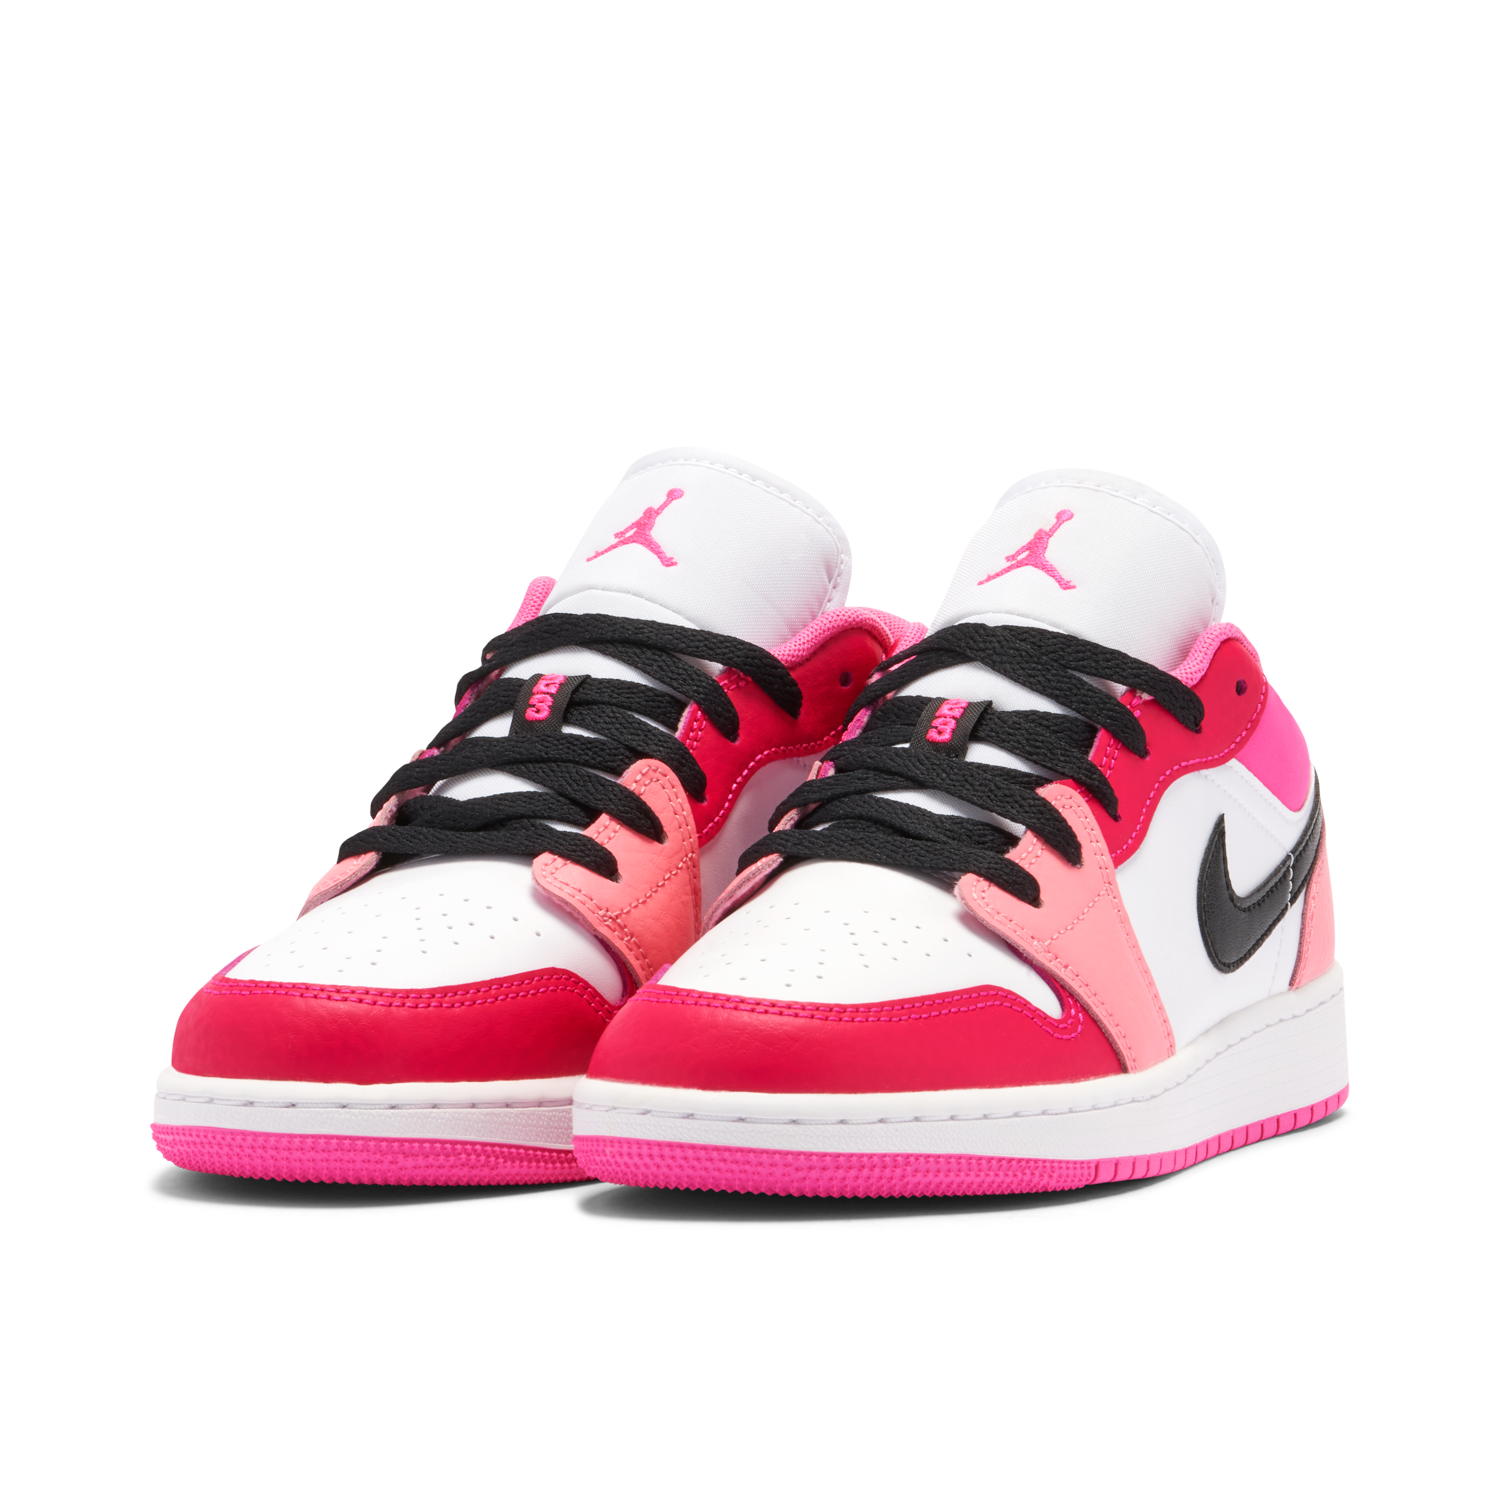 red and pink jordans